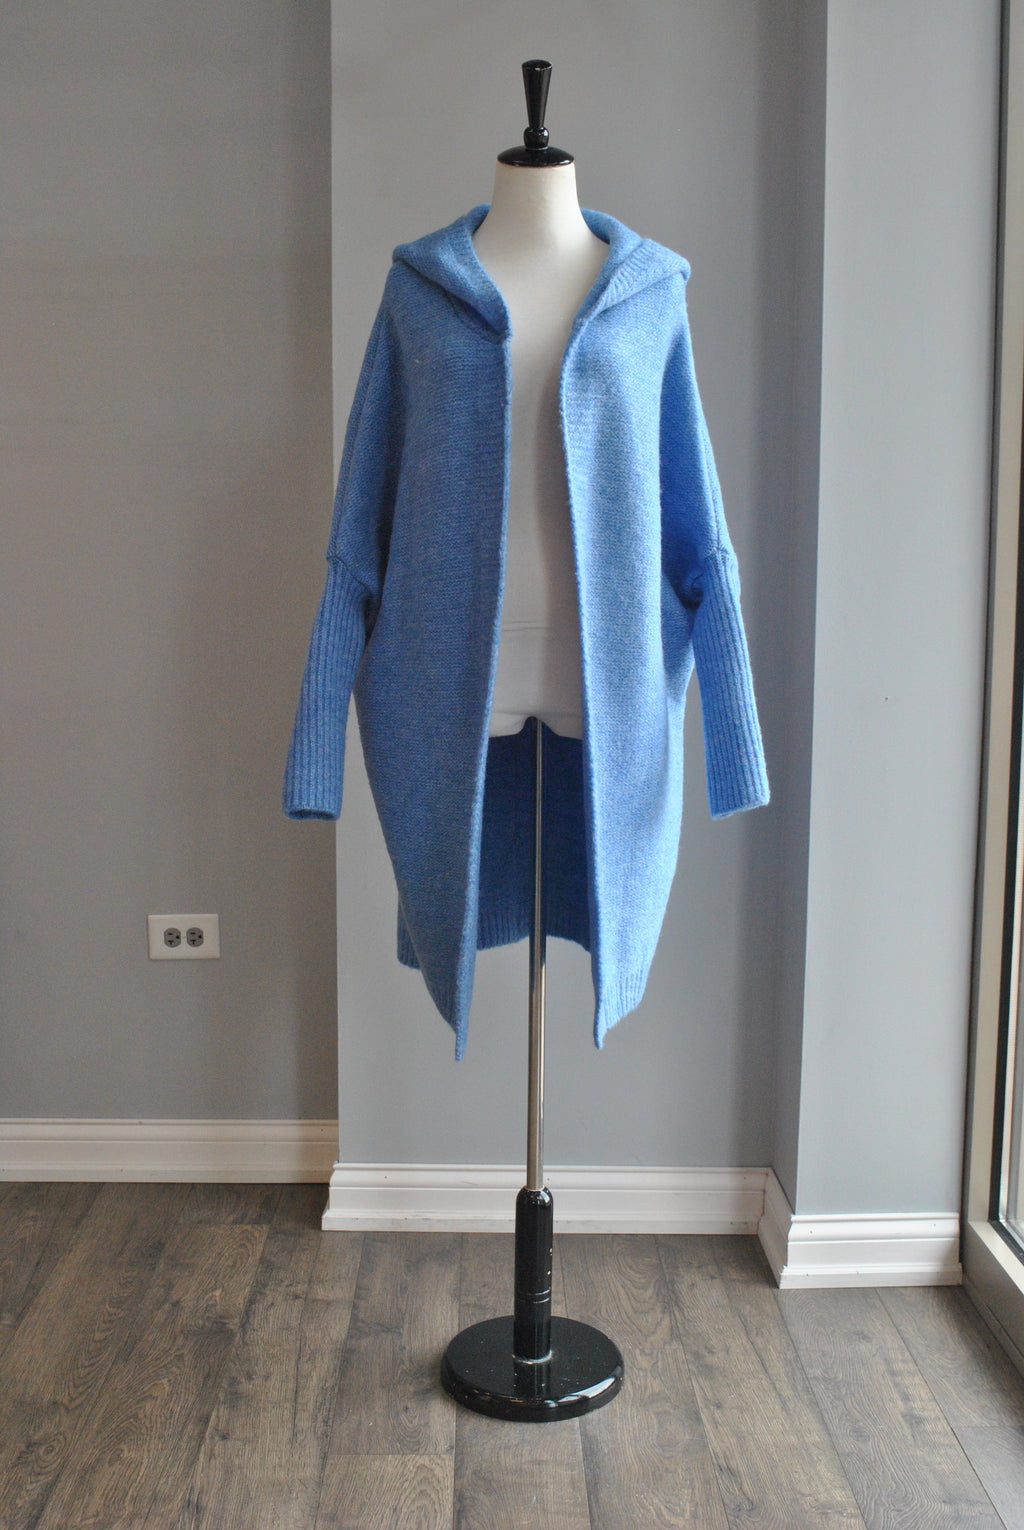 DENIM BLUE OVERSIZED OPEN STYLE SWEATER WITH A HOODIE